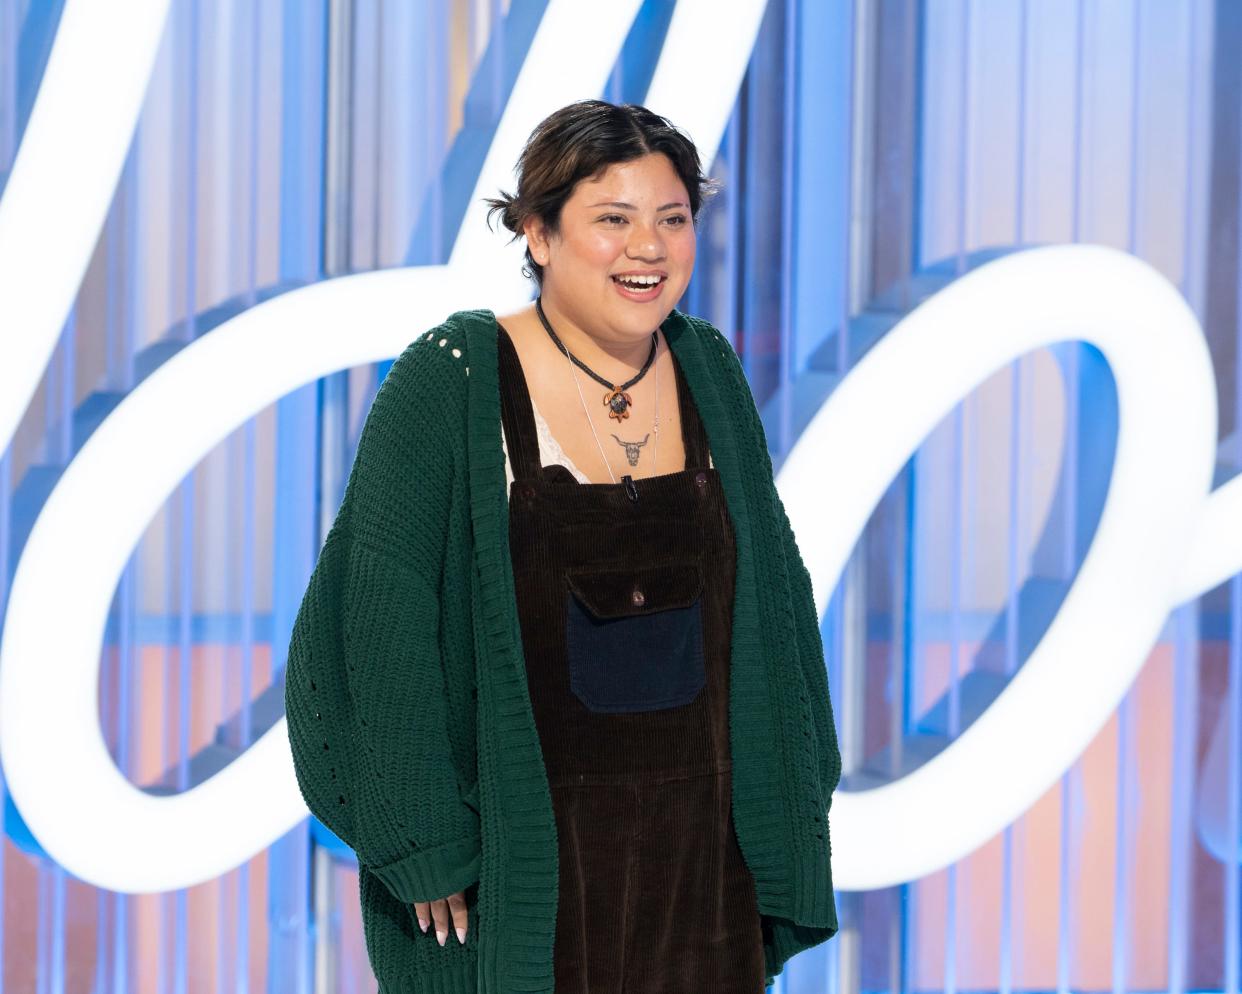 Julia Gagnon auditions for the "American Idol" judges on Season 22, Episode 5.